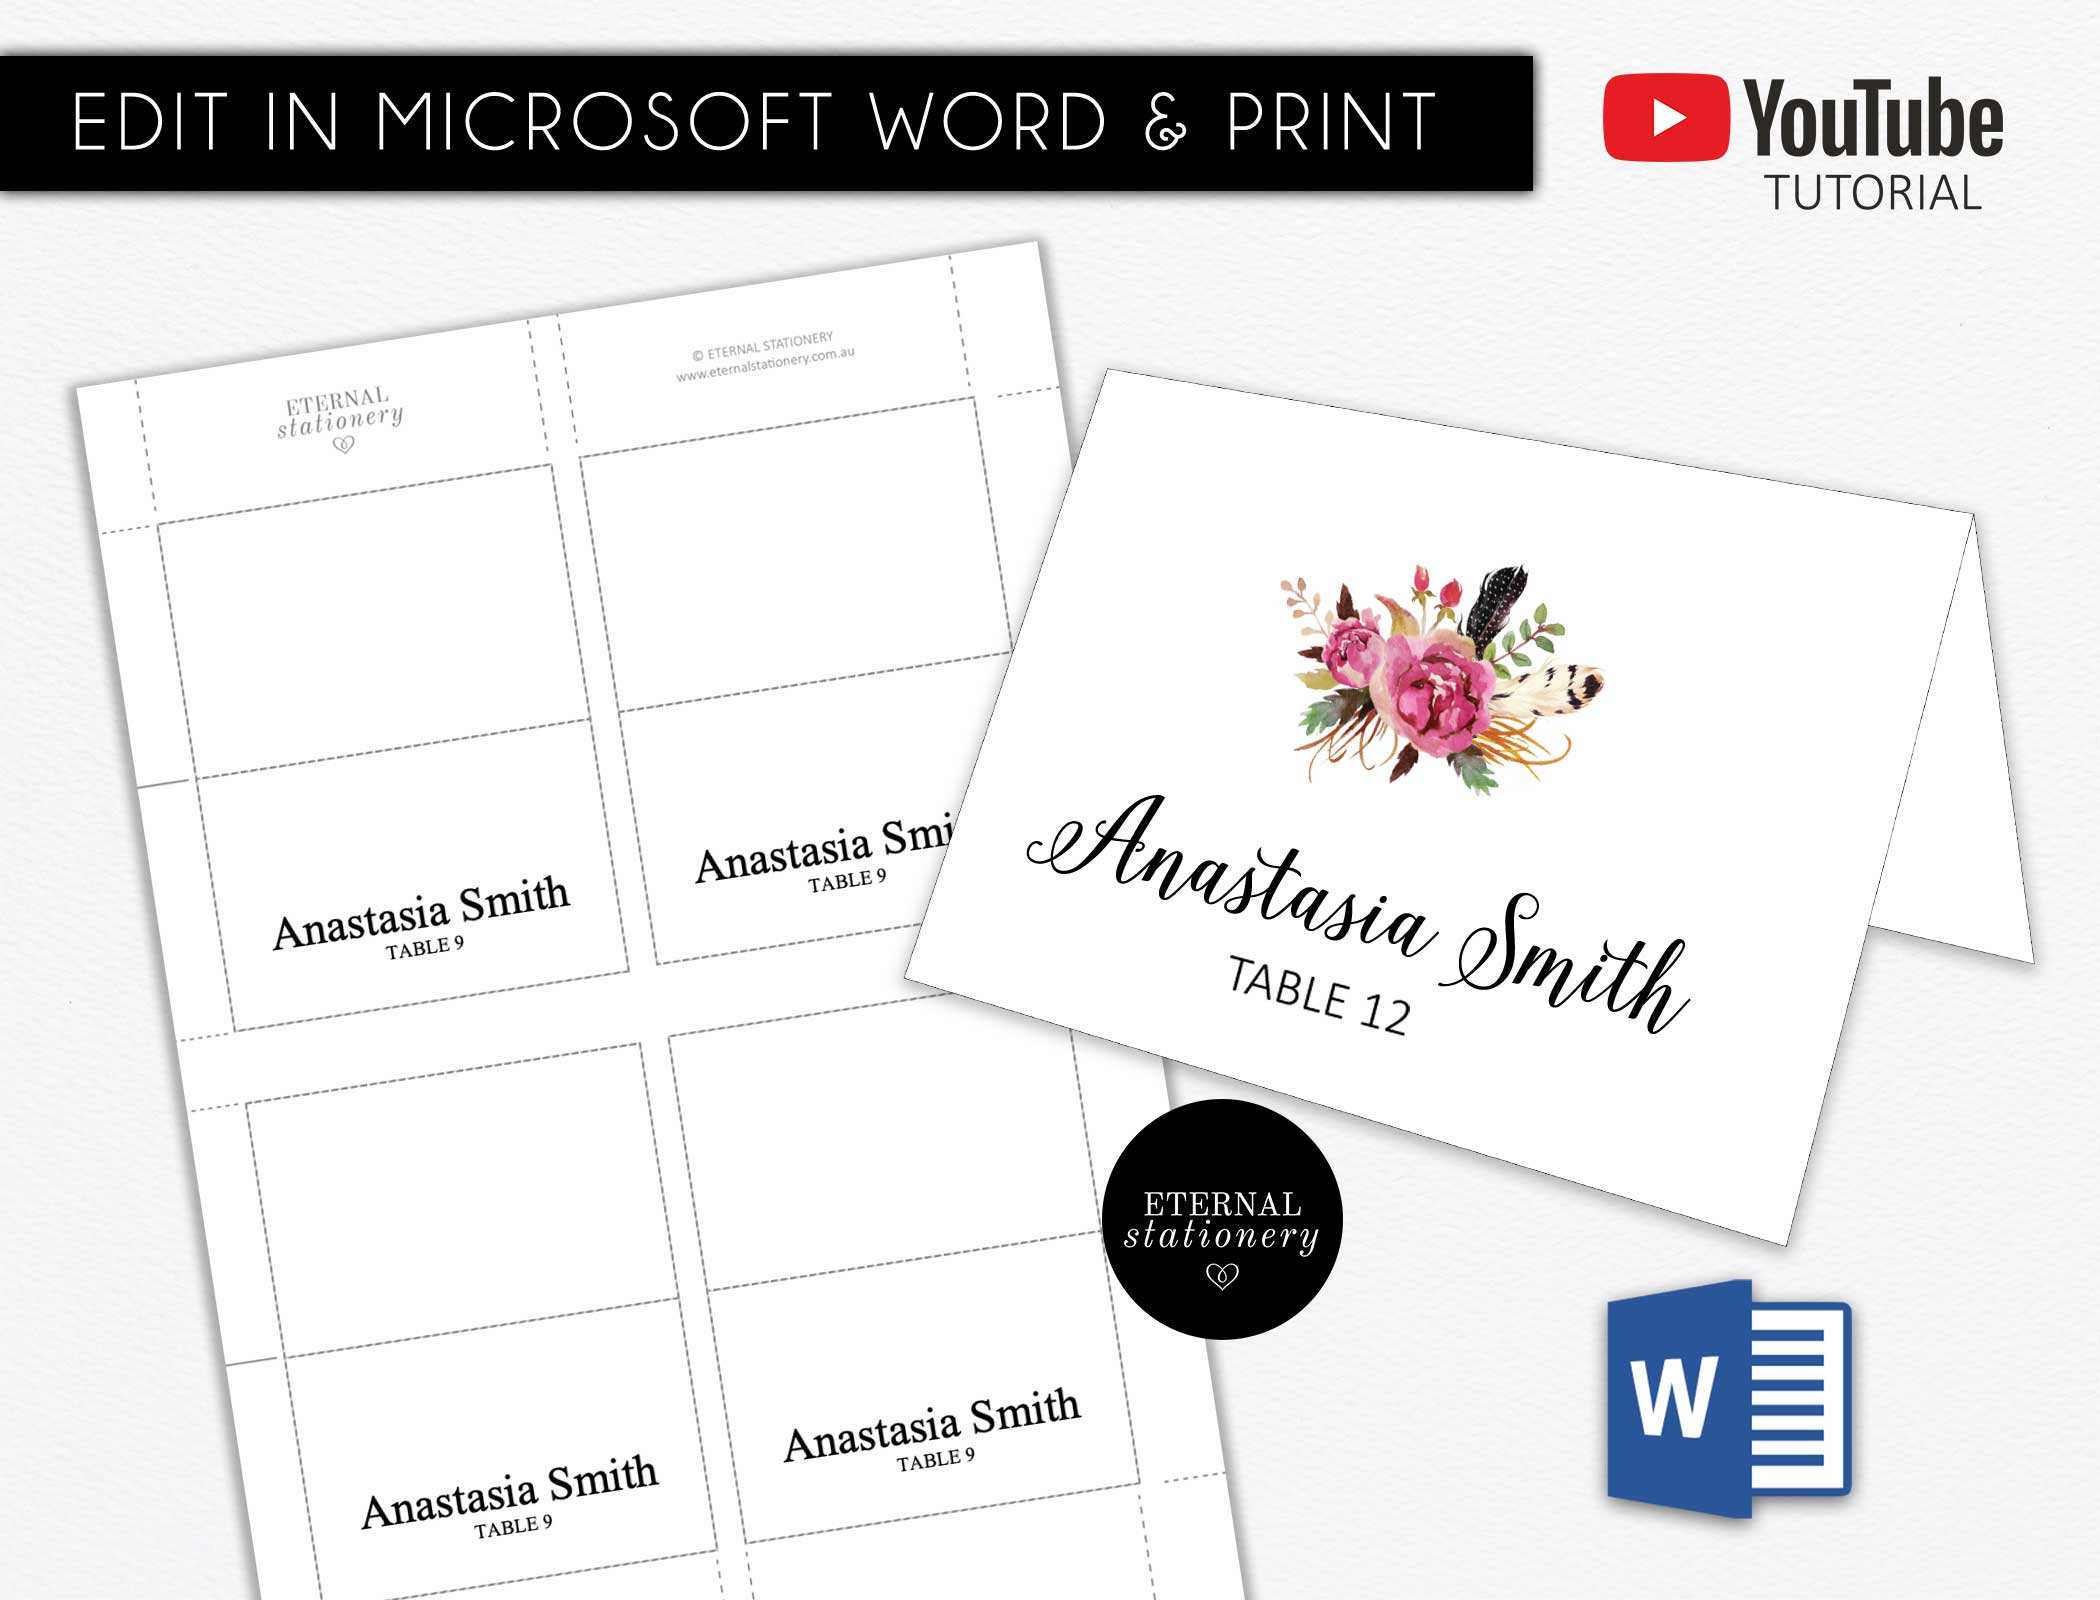 Diy Editable Microsoft Word Place Card Template, Wedding Place Card, Tent  Card, Engagement, Corporate Place Card, Escort Card, Pc 01 Within Microsoft Word Place Card Template